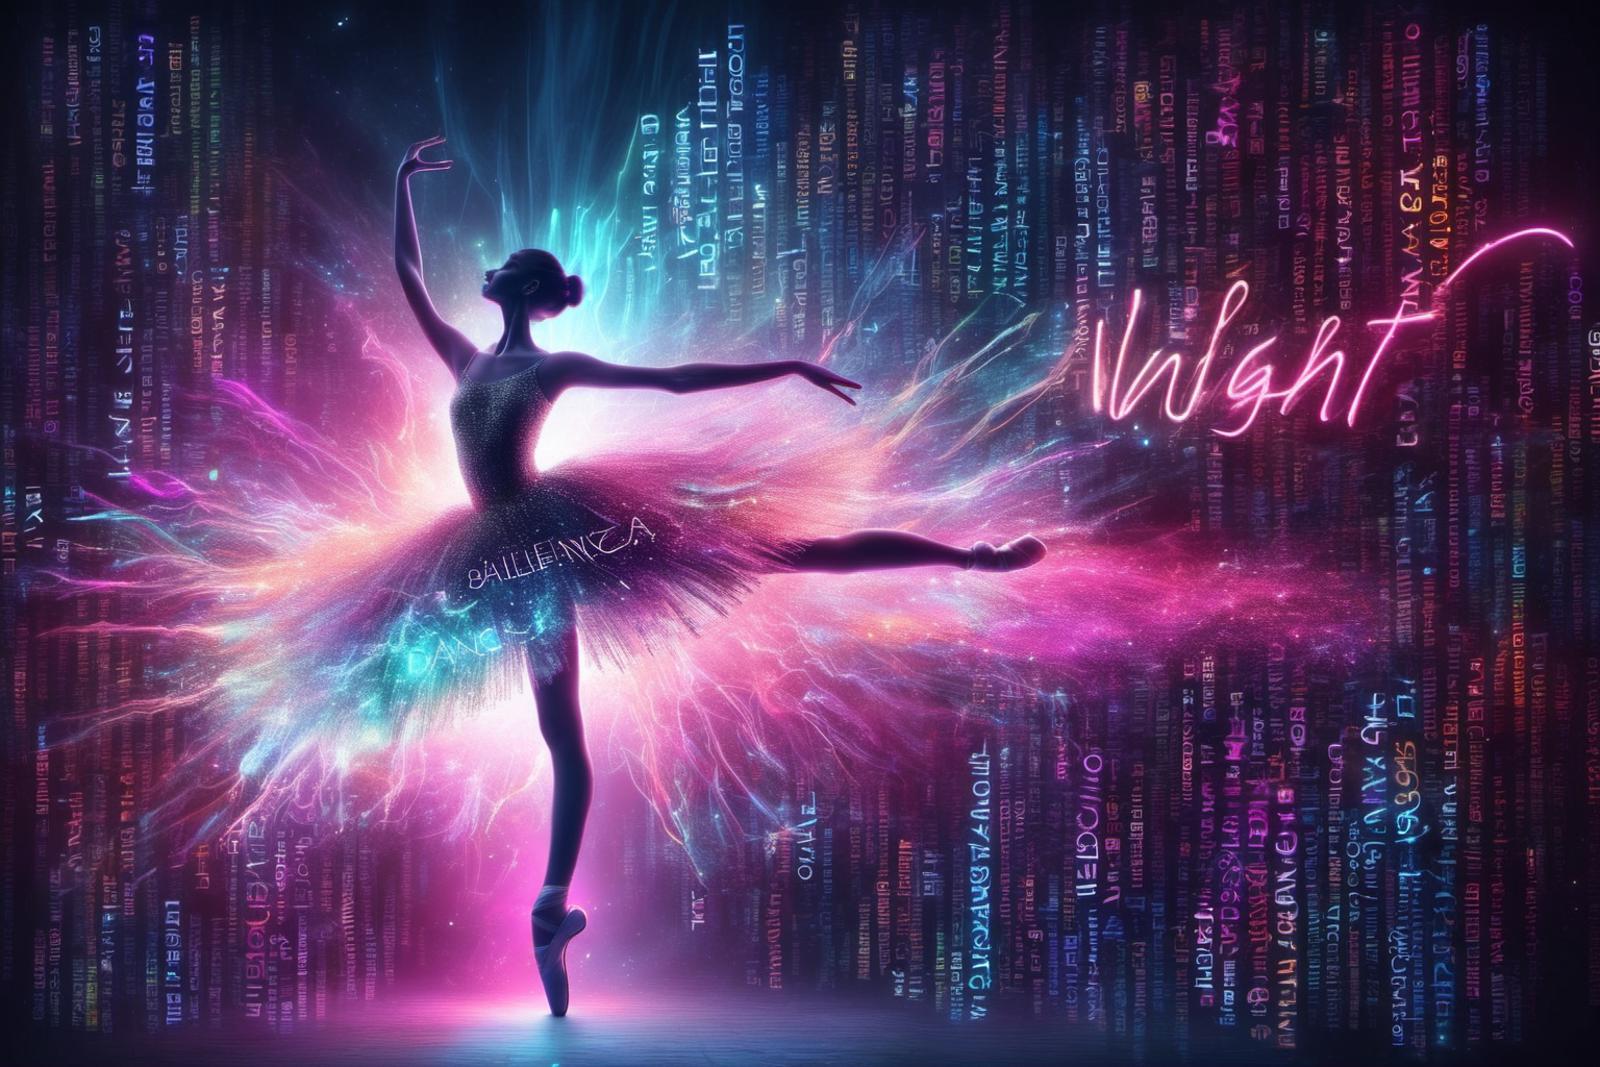 Purple and Pink Digital Art of a Ballerina Dancing with Lights.